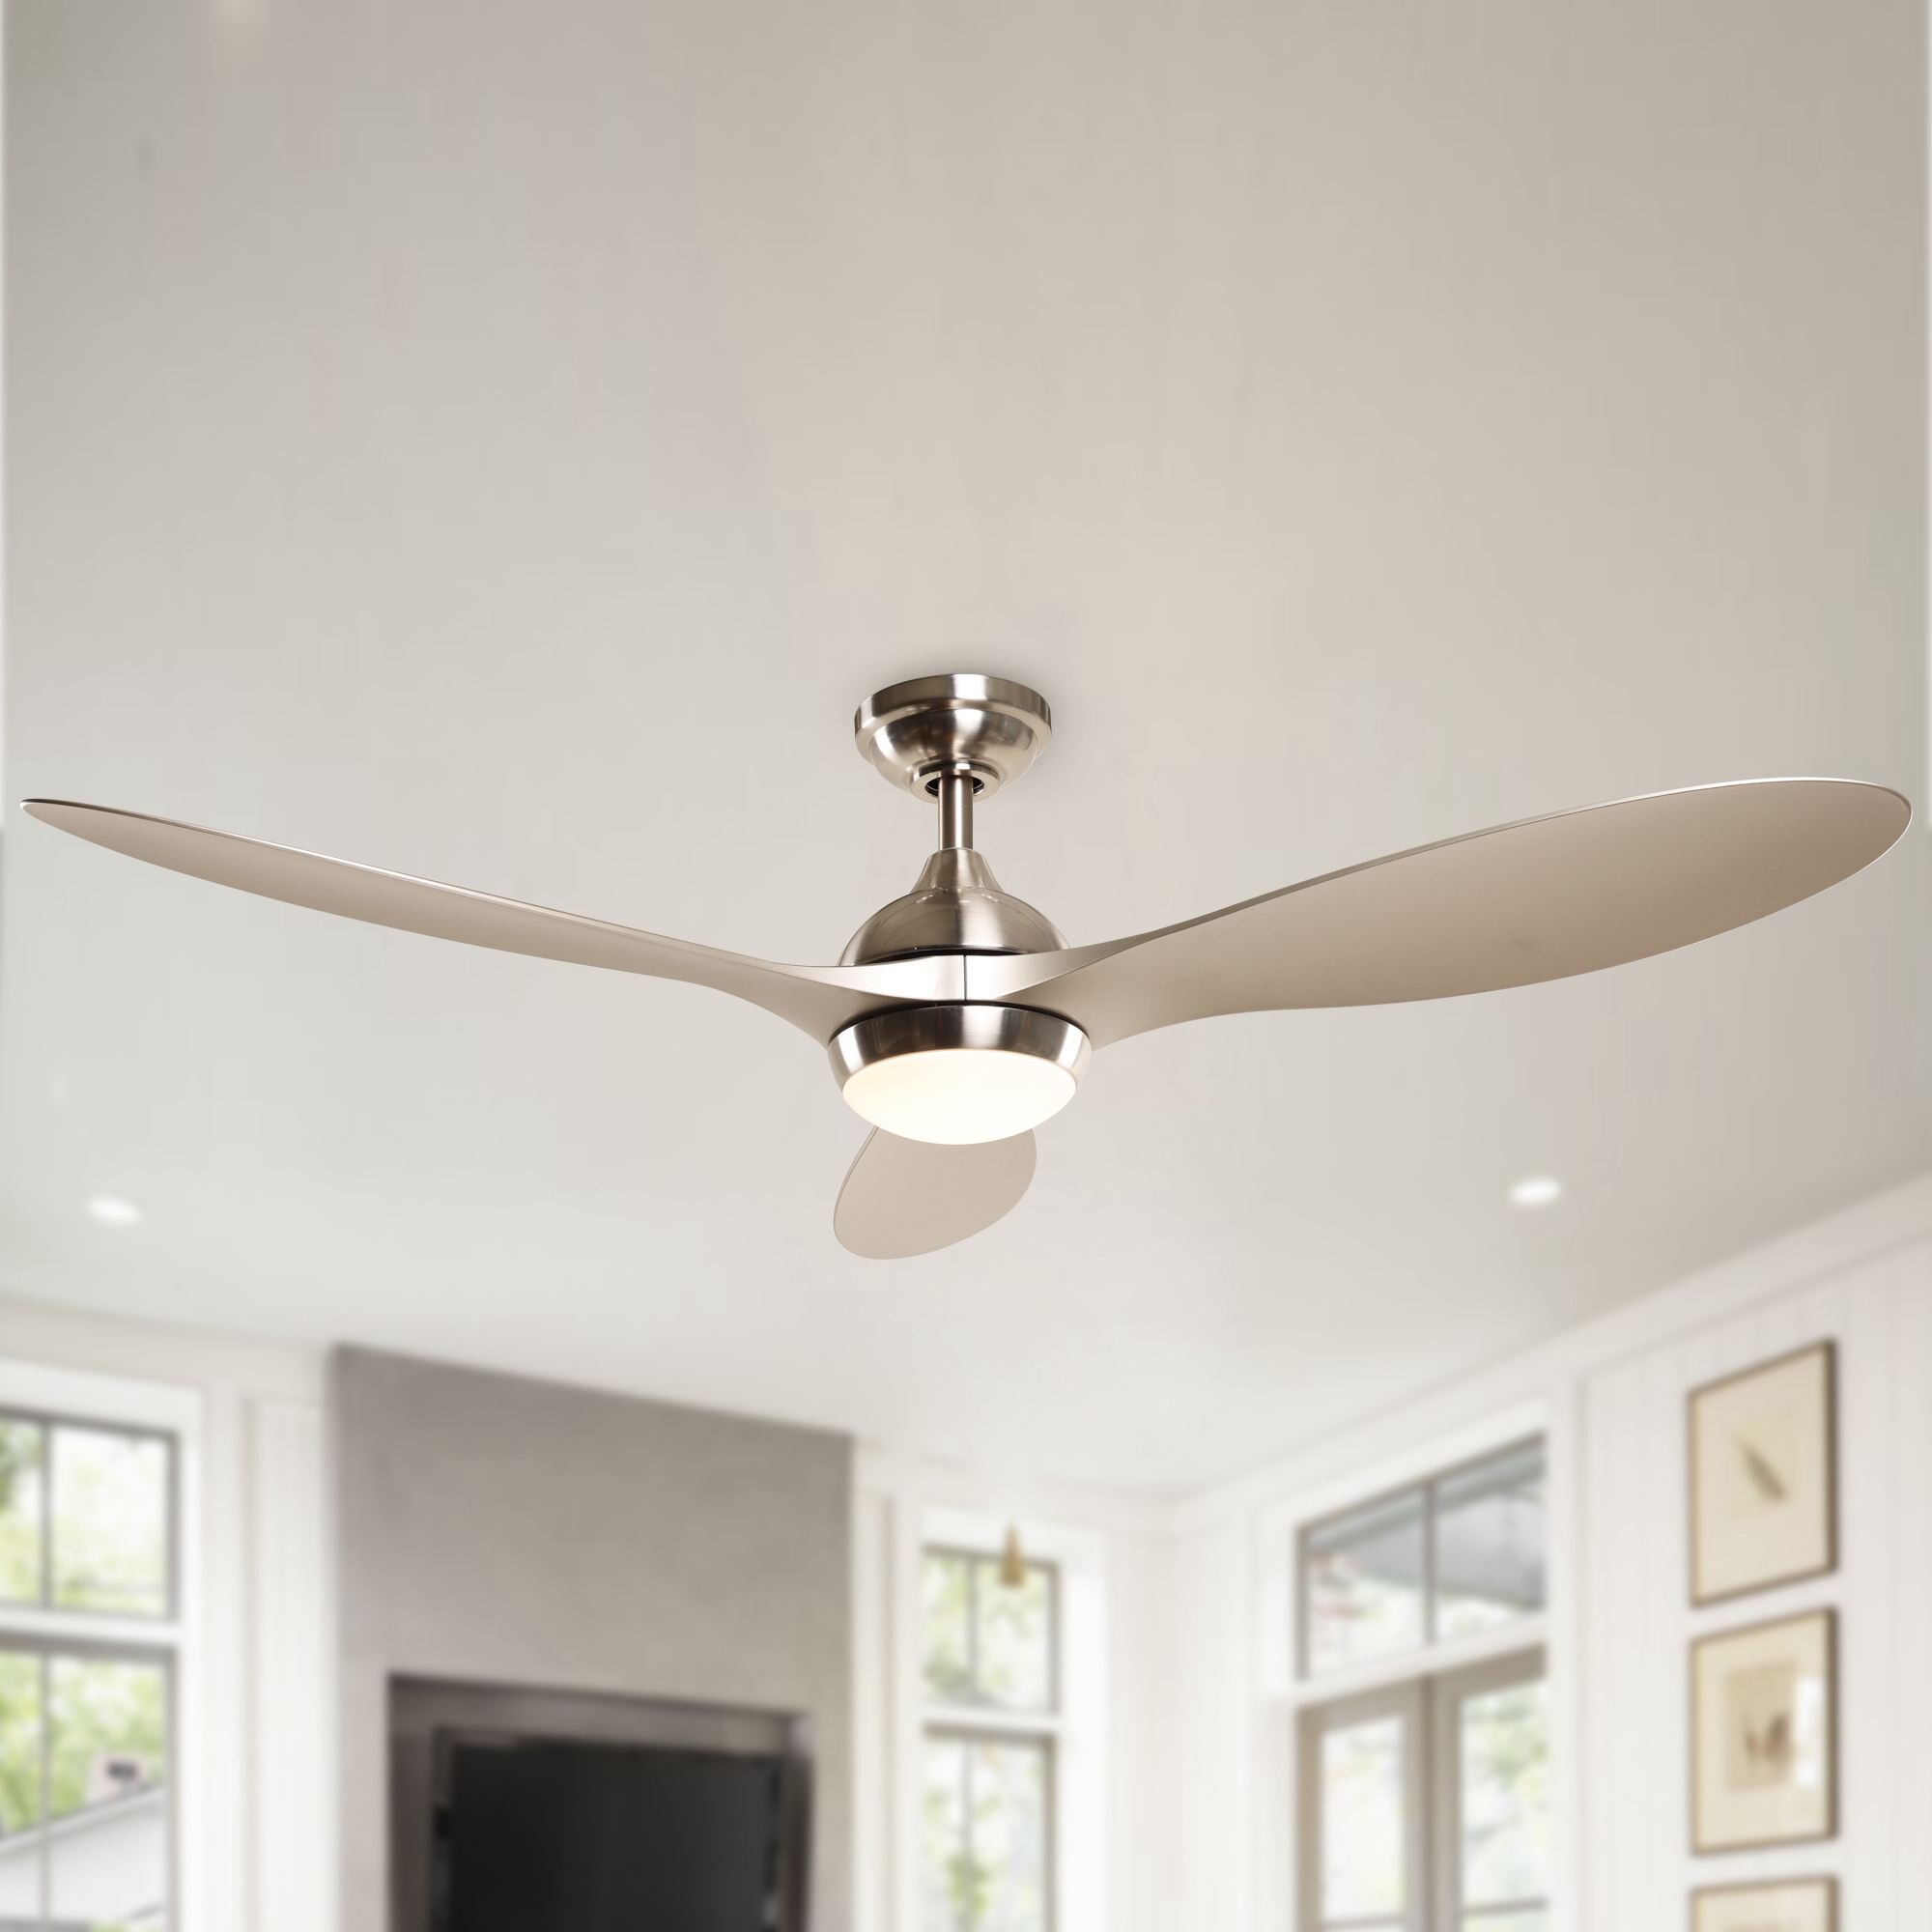 56 in Stylish Modern Brushed Nickel Indoor Ceiling Fan Light Kit Remote Home 